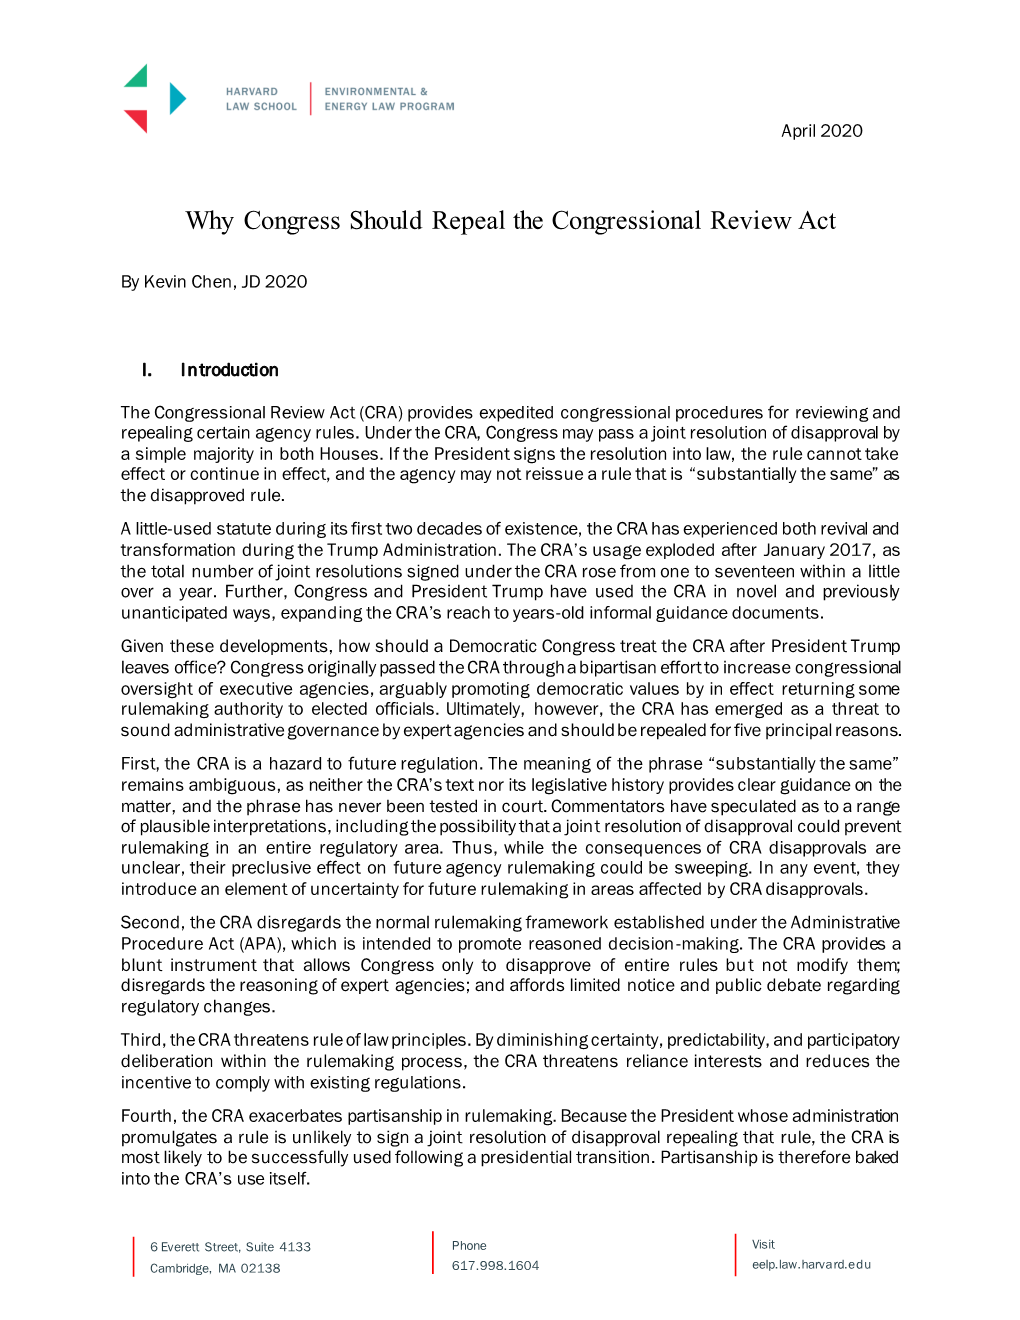 Why Congress Should Repeal the Congressional Review Act